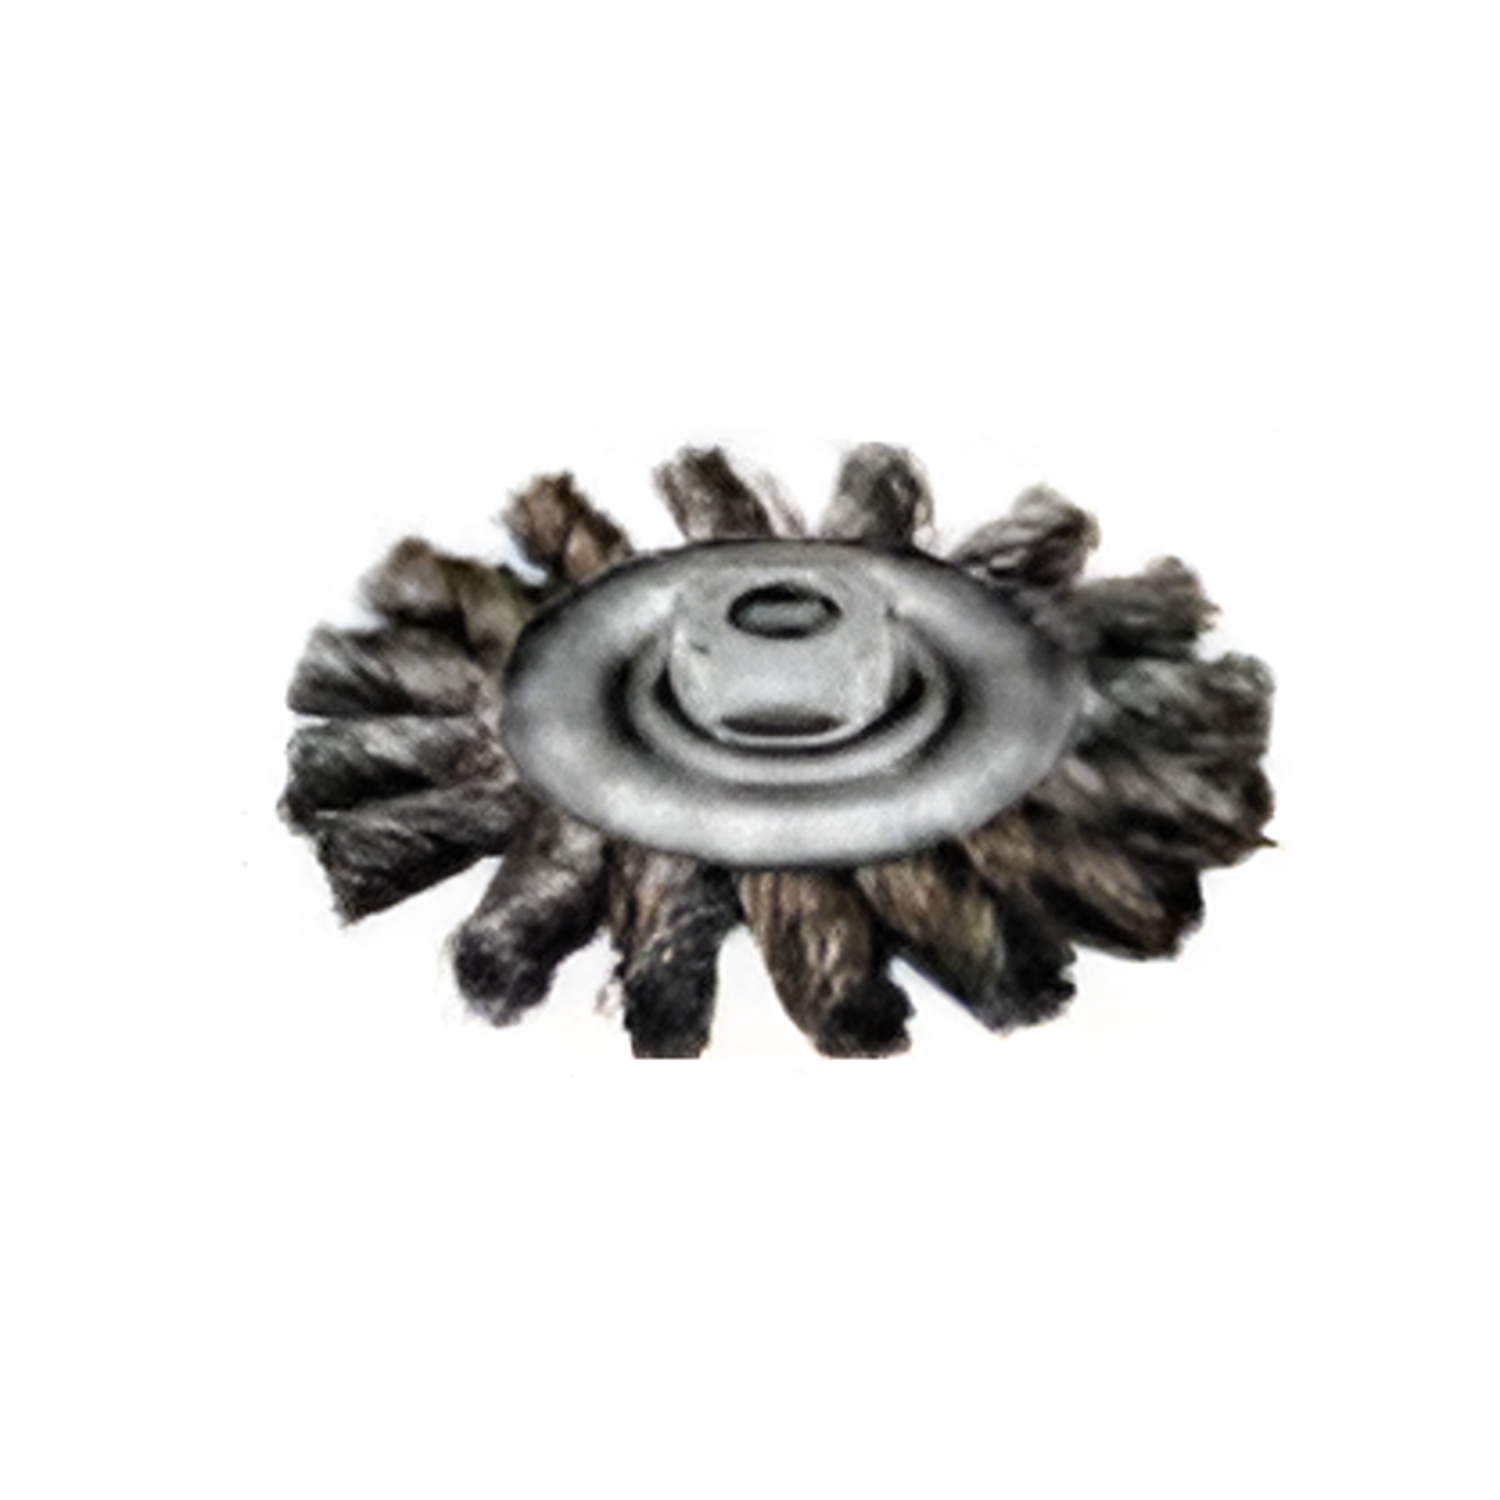 YEW AIK AE00790 NSK Twist Knot Wheel Brush (For Electric Tool) - Premium Wheel Brush from YEW AIK - Shop now at Yew Aik.